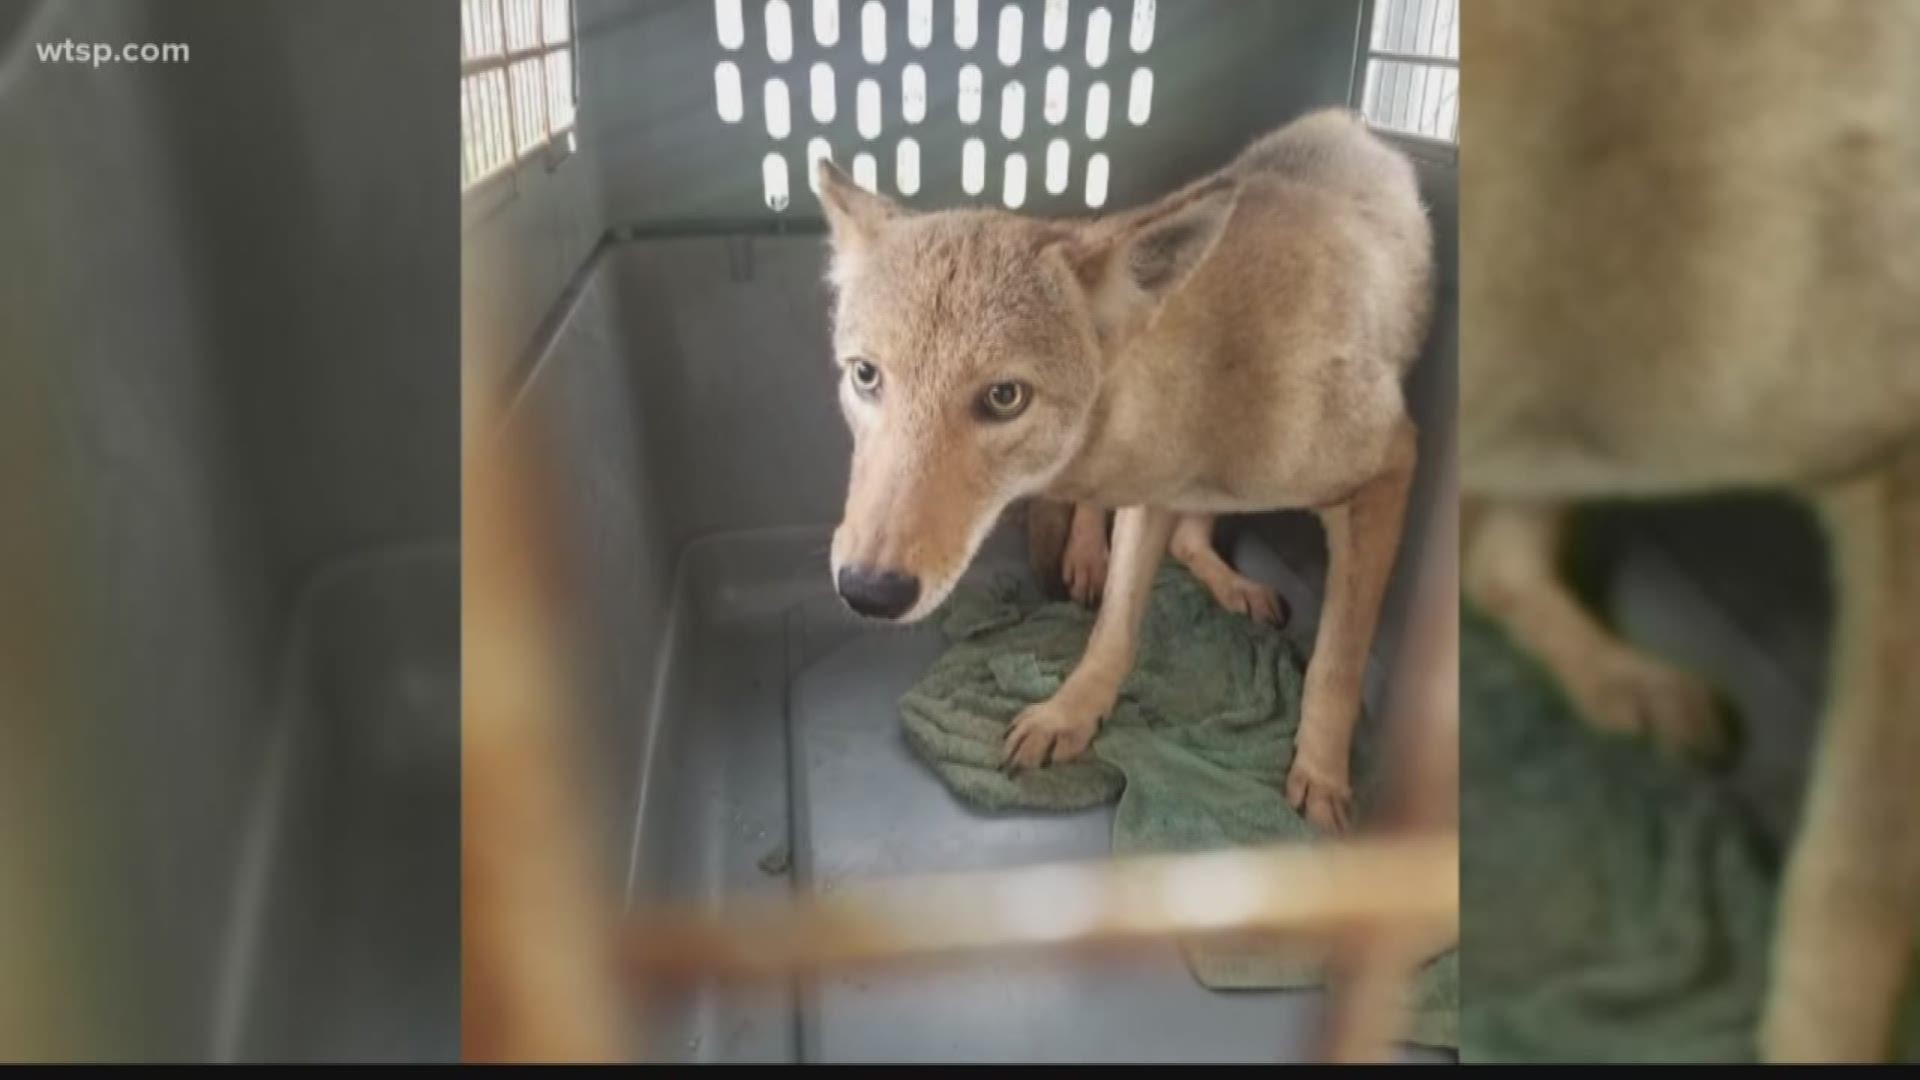 People in Venice said they’re seeing more coyotes than usual, and they don’t look so good.

Wildlife officials say an increased amount of development in the area is cutting down on the coyotes’ space to roam and access food, water and shelter.